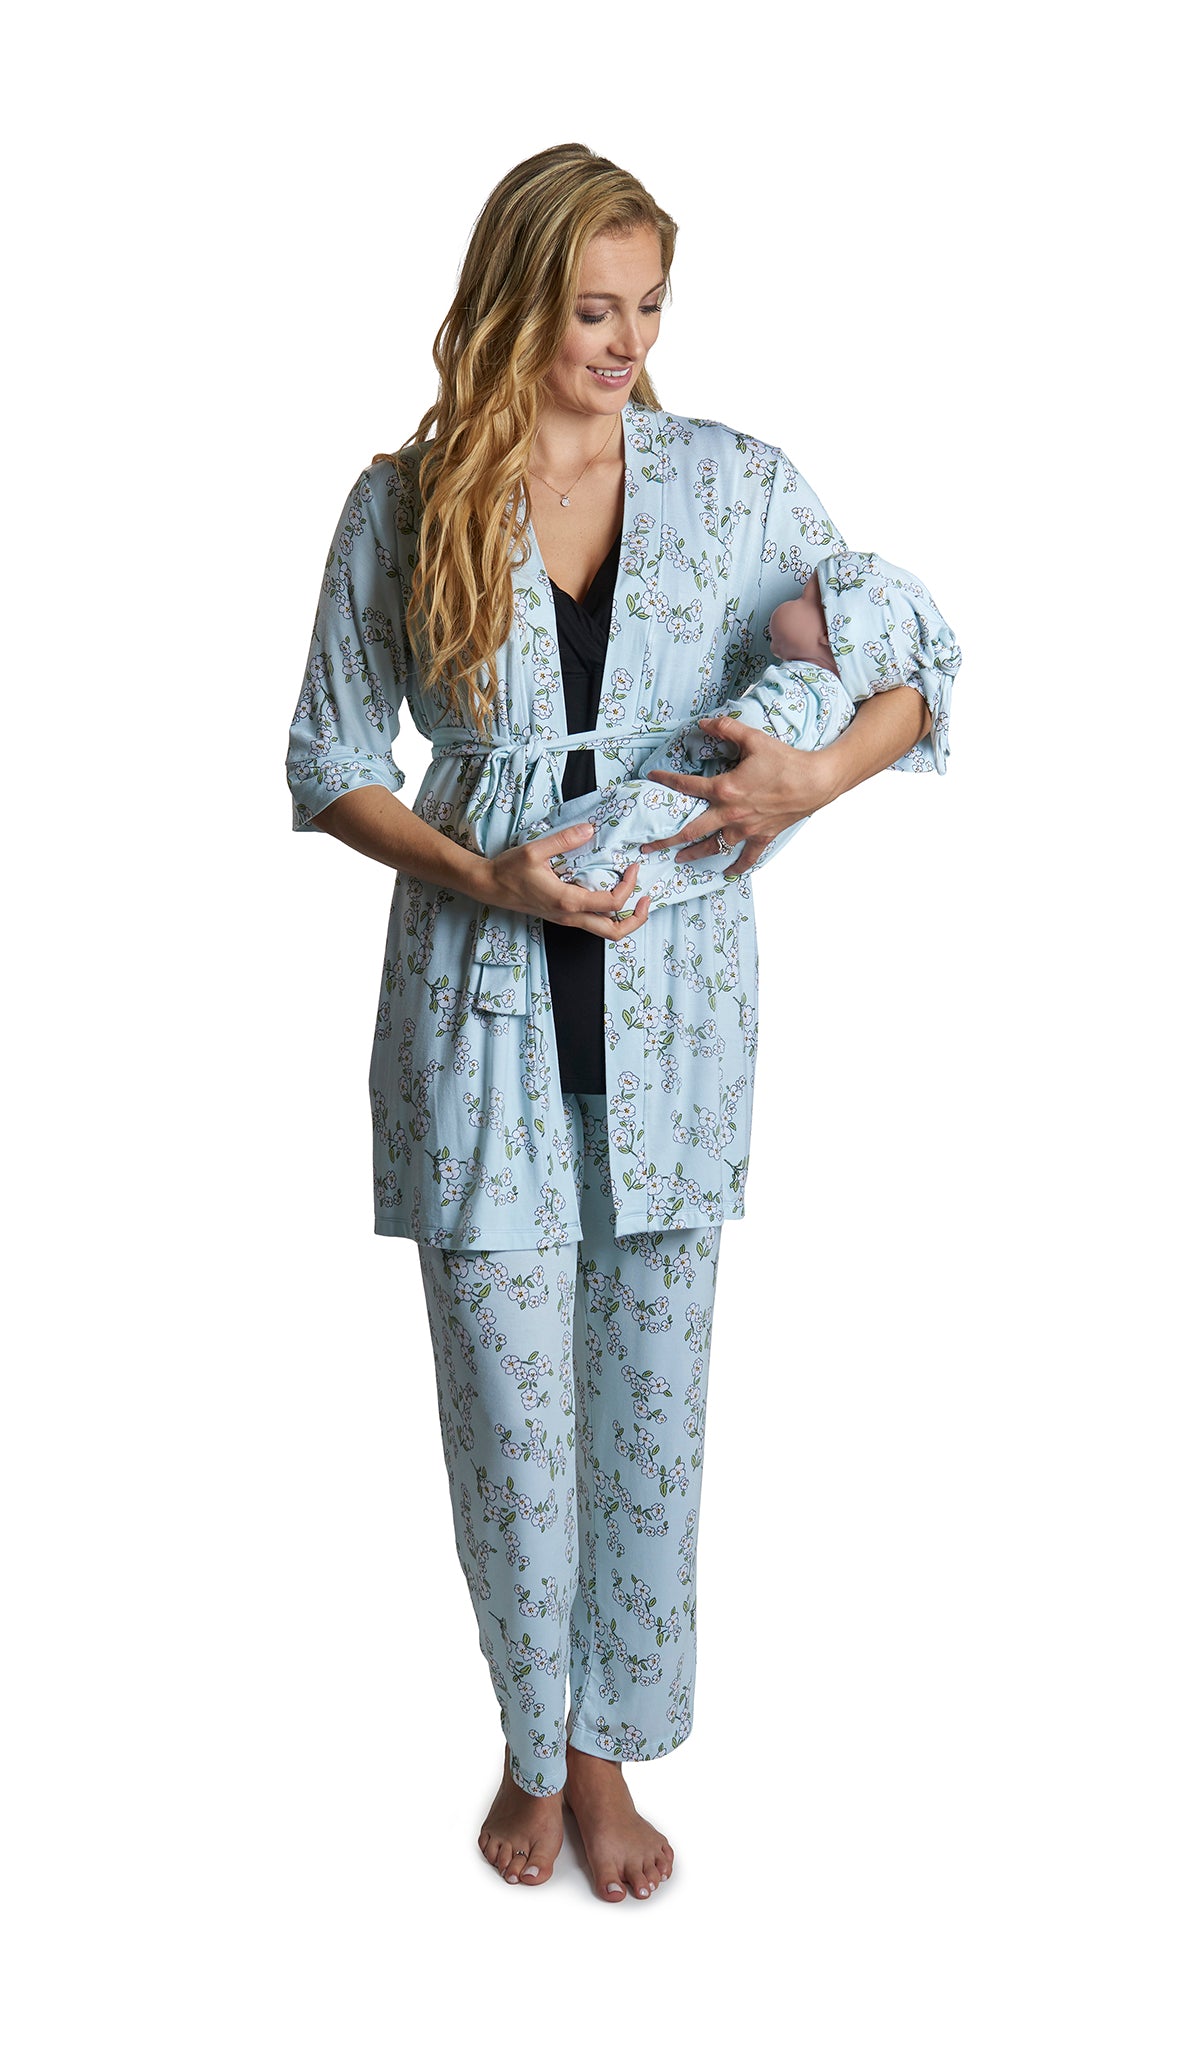 Baby's Breath Analise 5-Piece Set. Woman wearing 3/4 sleeve robe, tank top and pant while holding a baby wearing baby gown and knotted baby hat.